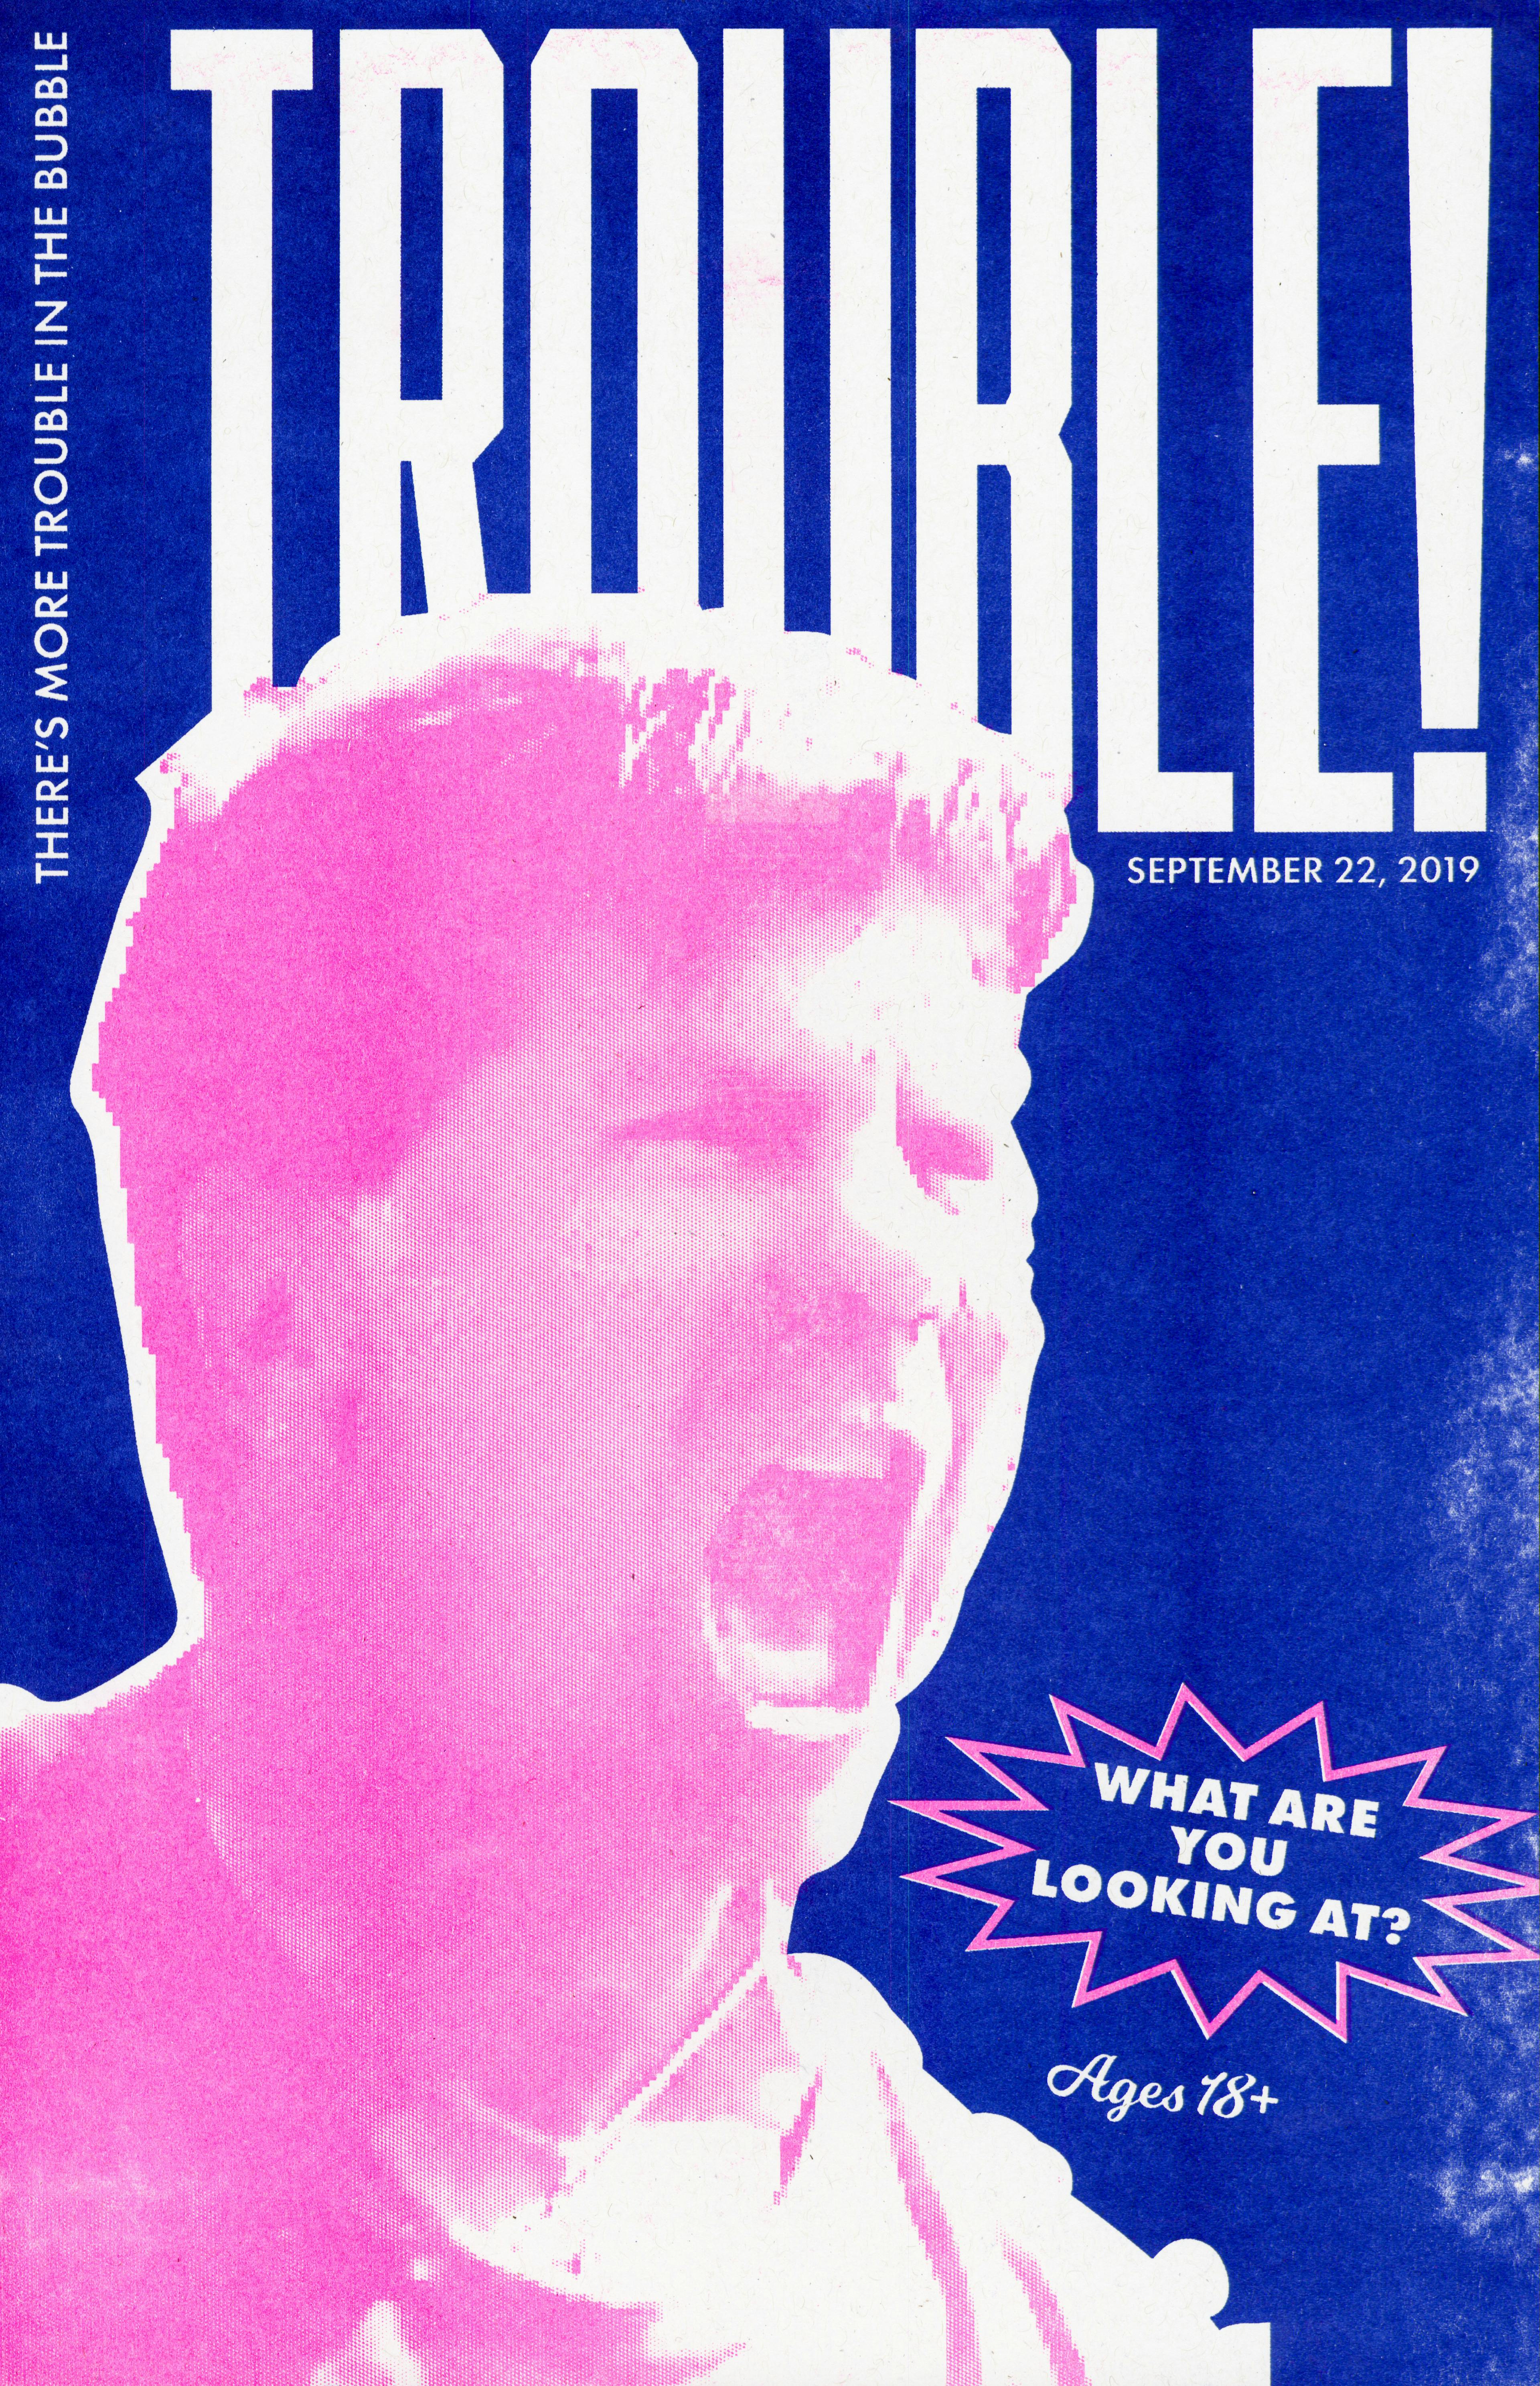 A blue poster with "Trouble" in big white letters with a pink closeup of Eric Furda shouting with smaller text saying "What are you looking at?"